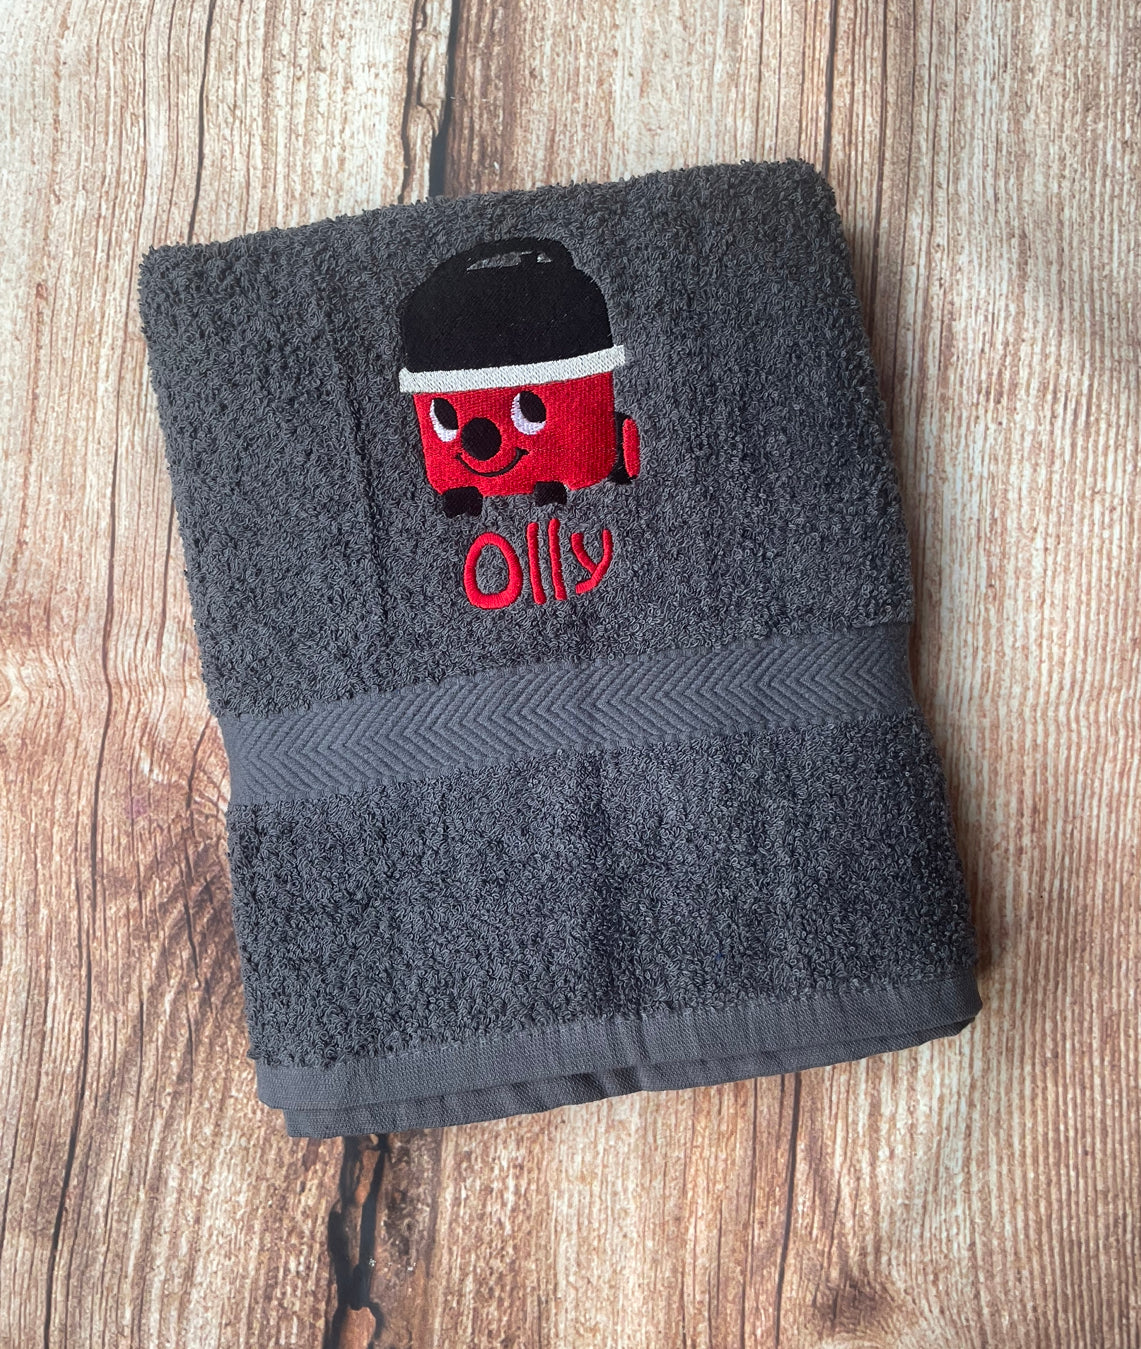 Embroidered personalised swimming or sports towel. Ideal gift // Red hoover